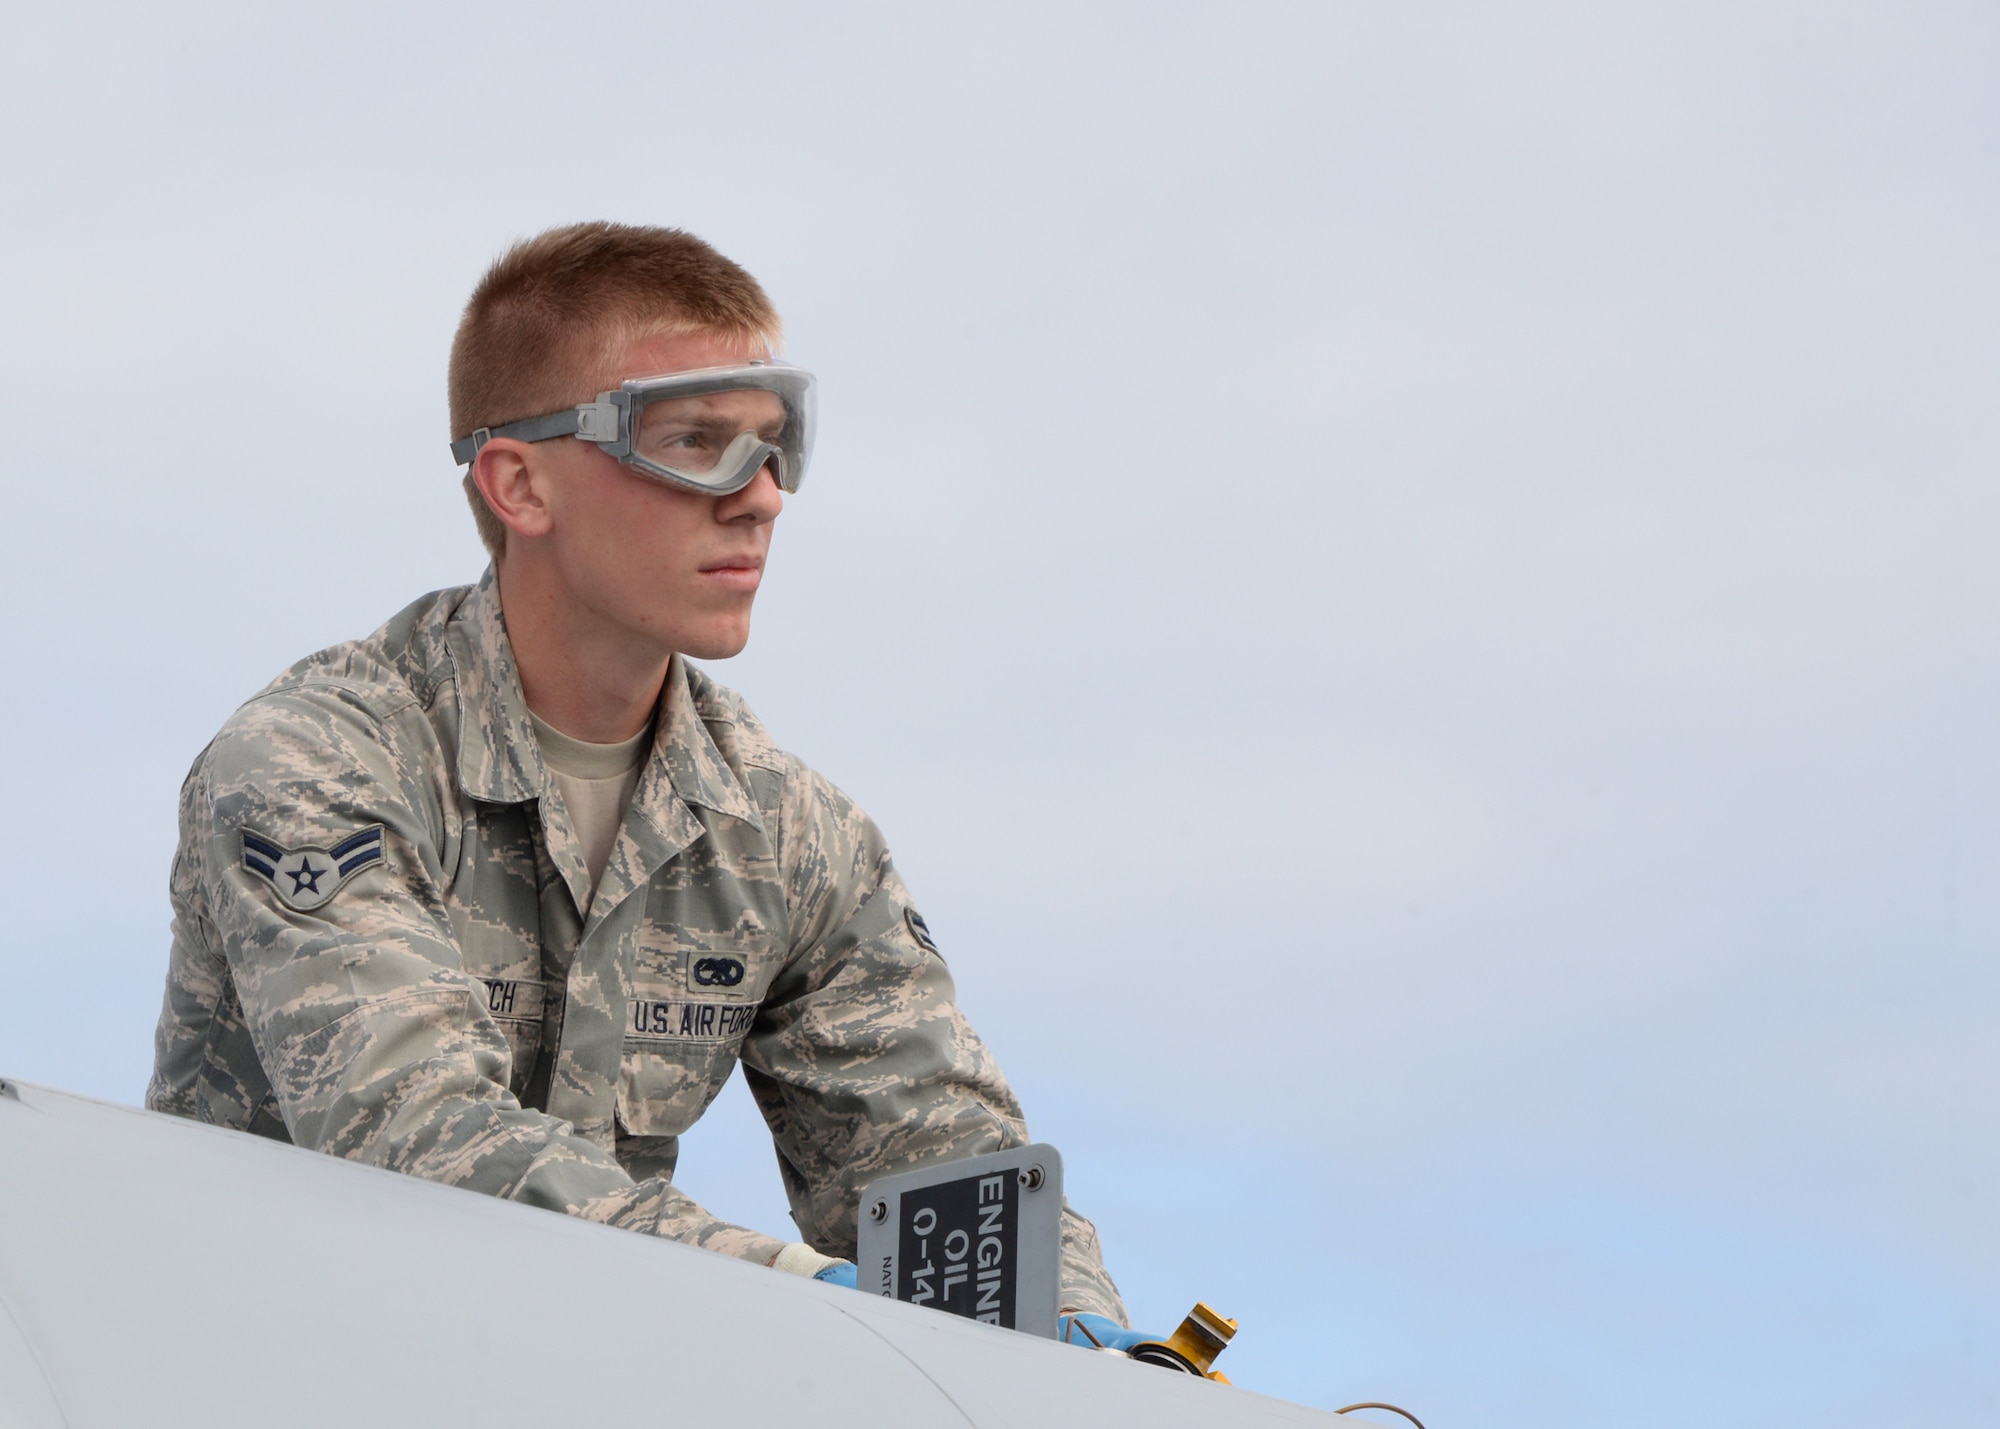 Airman 1st Class John McCulloch, A-10 Crew Chief, 175th Maintenance Squadron, Maryland Air National Guard, works on an A-10C during Exercise Red Flag – Alaska 14-3, Eielson Air Force Base, Ak. Exercise Red Flag – Alaska is a 10 day exercise that is a series of Pacific Air Forces commander-directed field training exercises for U.S. forces, provides joint offensive counter-air, interdiction, close air support, and large force employment training in a simulated combat environment. (Air National Guard photo by Senior Master Sgt. Ed Bard/RELEASED)